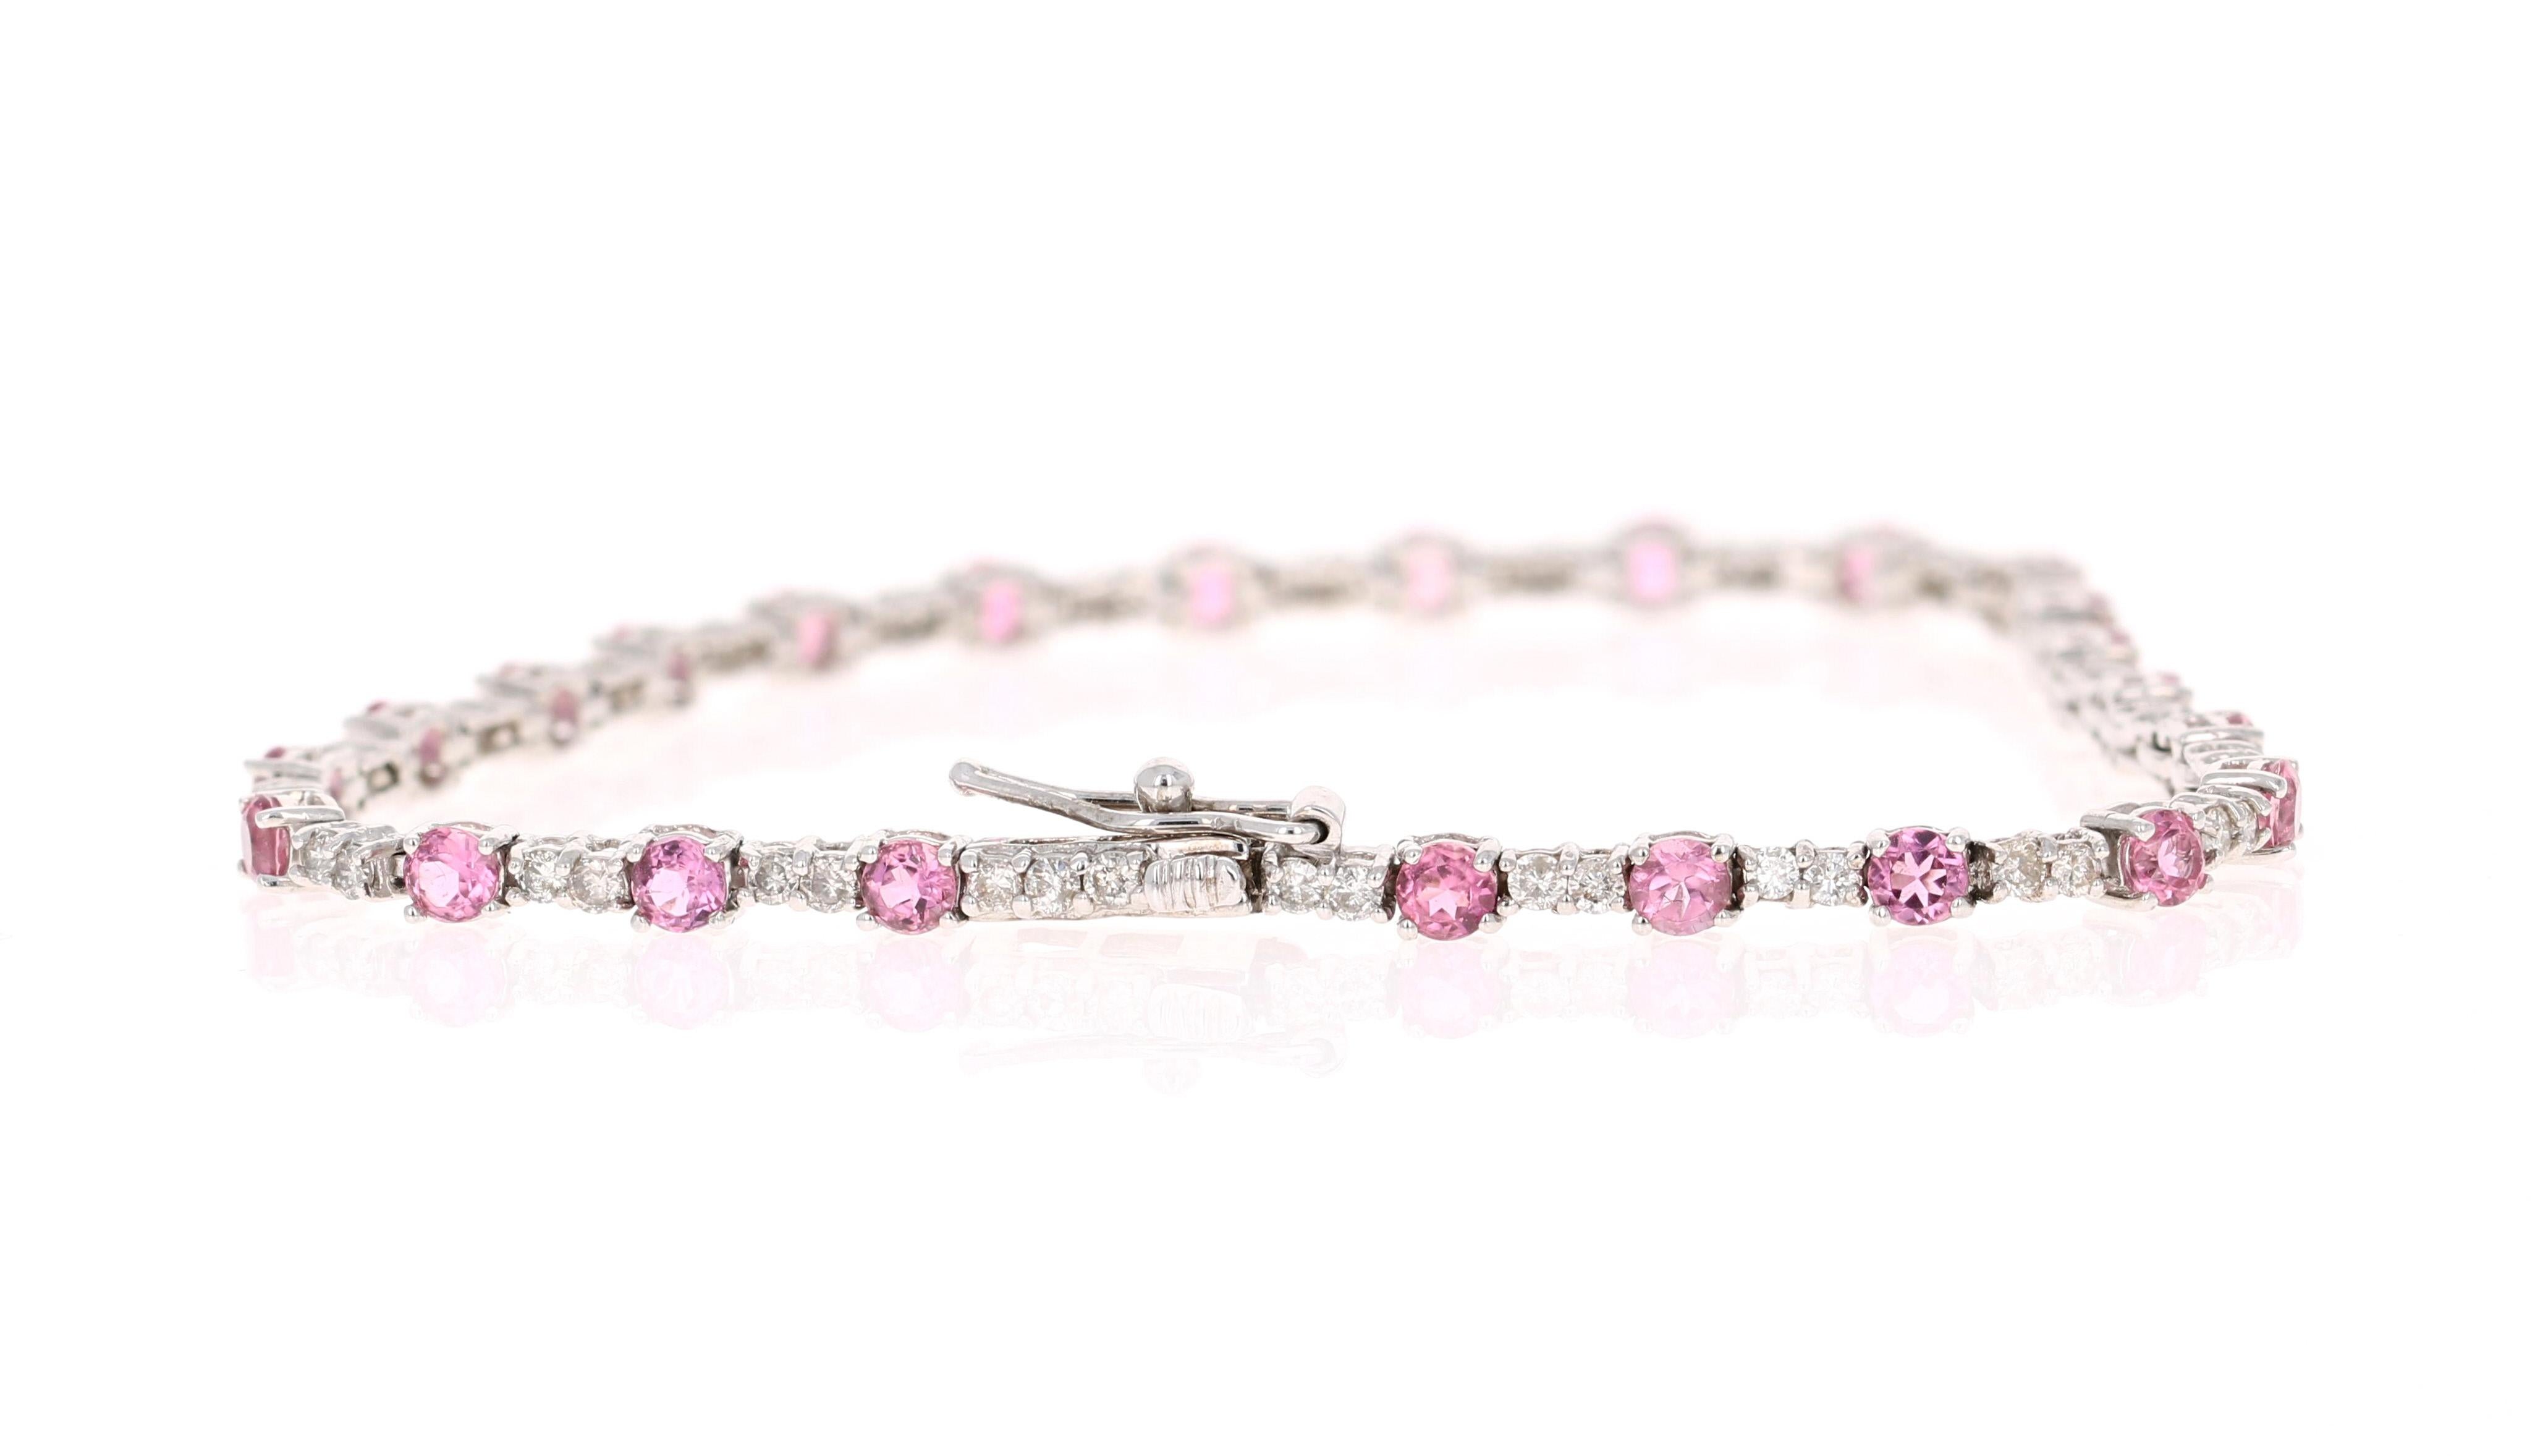 Beautiful Tourmaline Diamond Bracelet

This Bracelet has 24 Natural Round Cut Tourmalines that weigh 2.82 Carats. It also has 51 Round Cut Diamonds that weigh 1.05 Carats. The total carat weight of the bracelet is 3.87 Carats. 

It is curated in 14